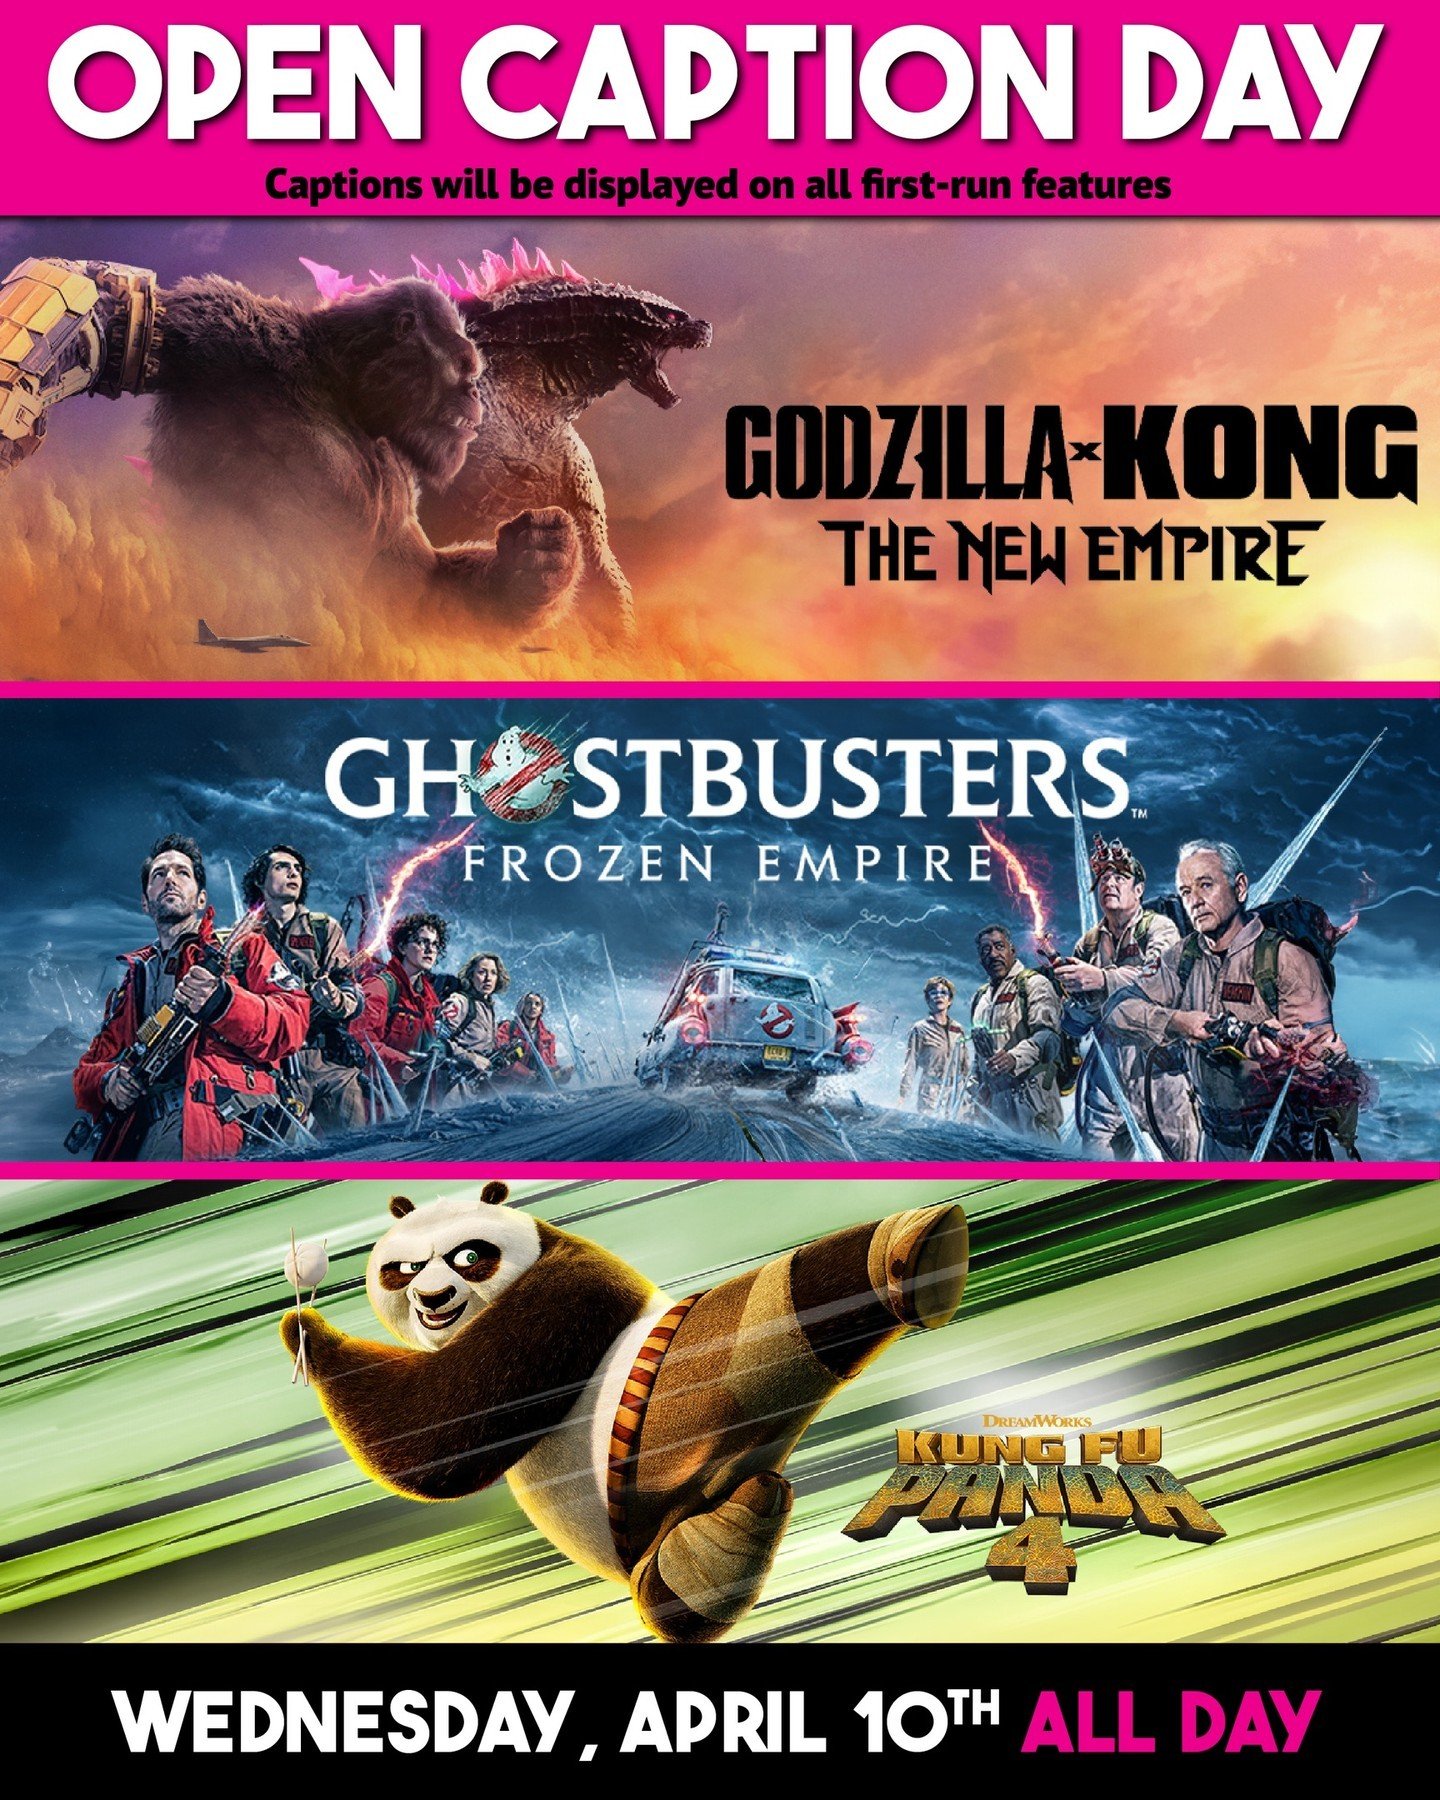 Today, April 10th, is Open Caption Day! Tickets available in our bio 🍿🎉💖 ⁠
.⁠
.⁠
.⁠
.⁠
.⁠
Photo caption: Posters for Godzilla x Kong: The New Empire, Ghostbusters: Frozen Empire, and Kung Fu Panda 4 are stacked on top of one another. Captions will